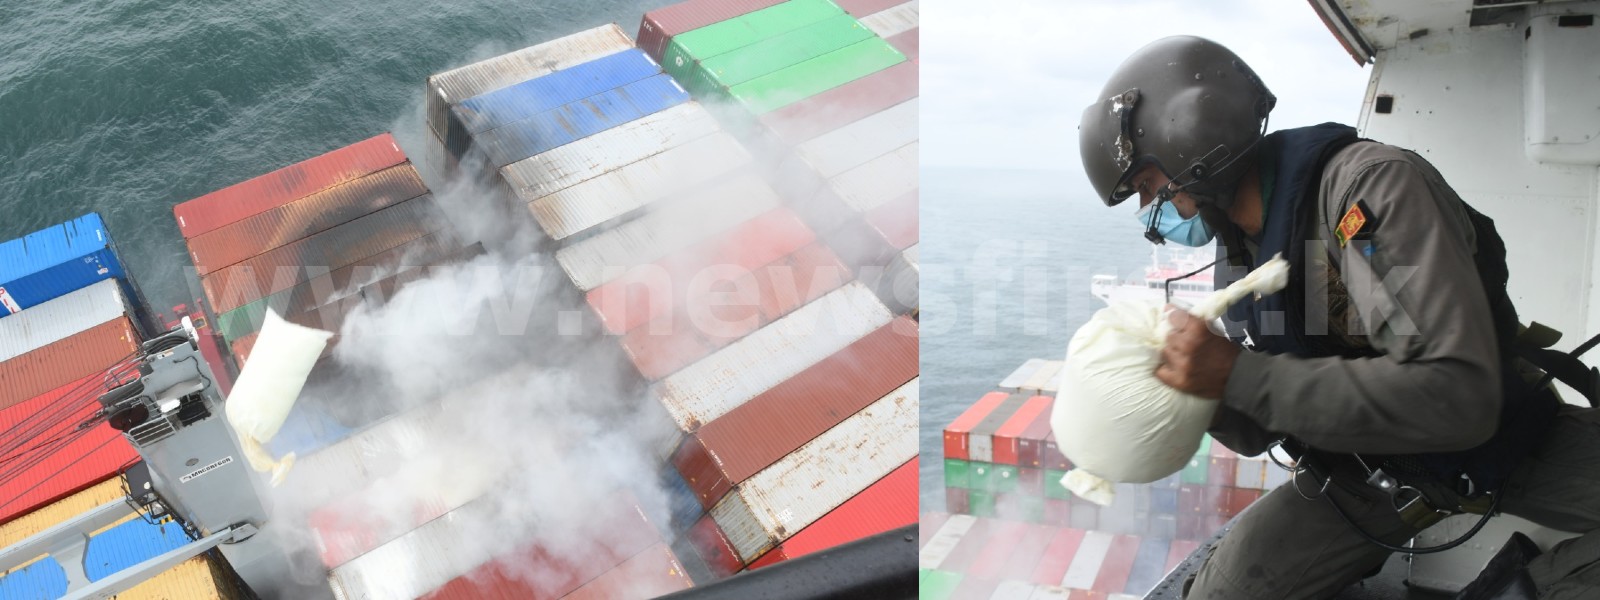 NBRO to test air quality after X-Press Pearl fire in seas off Colombo